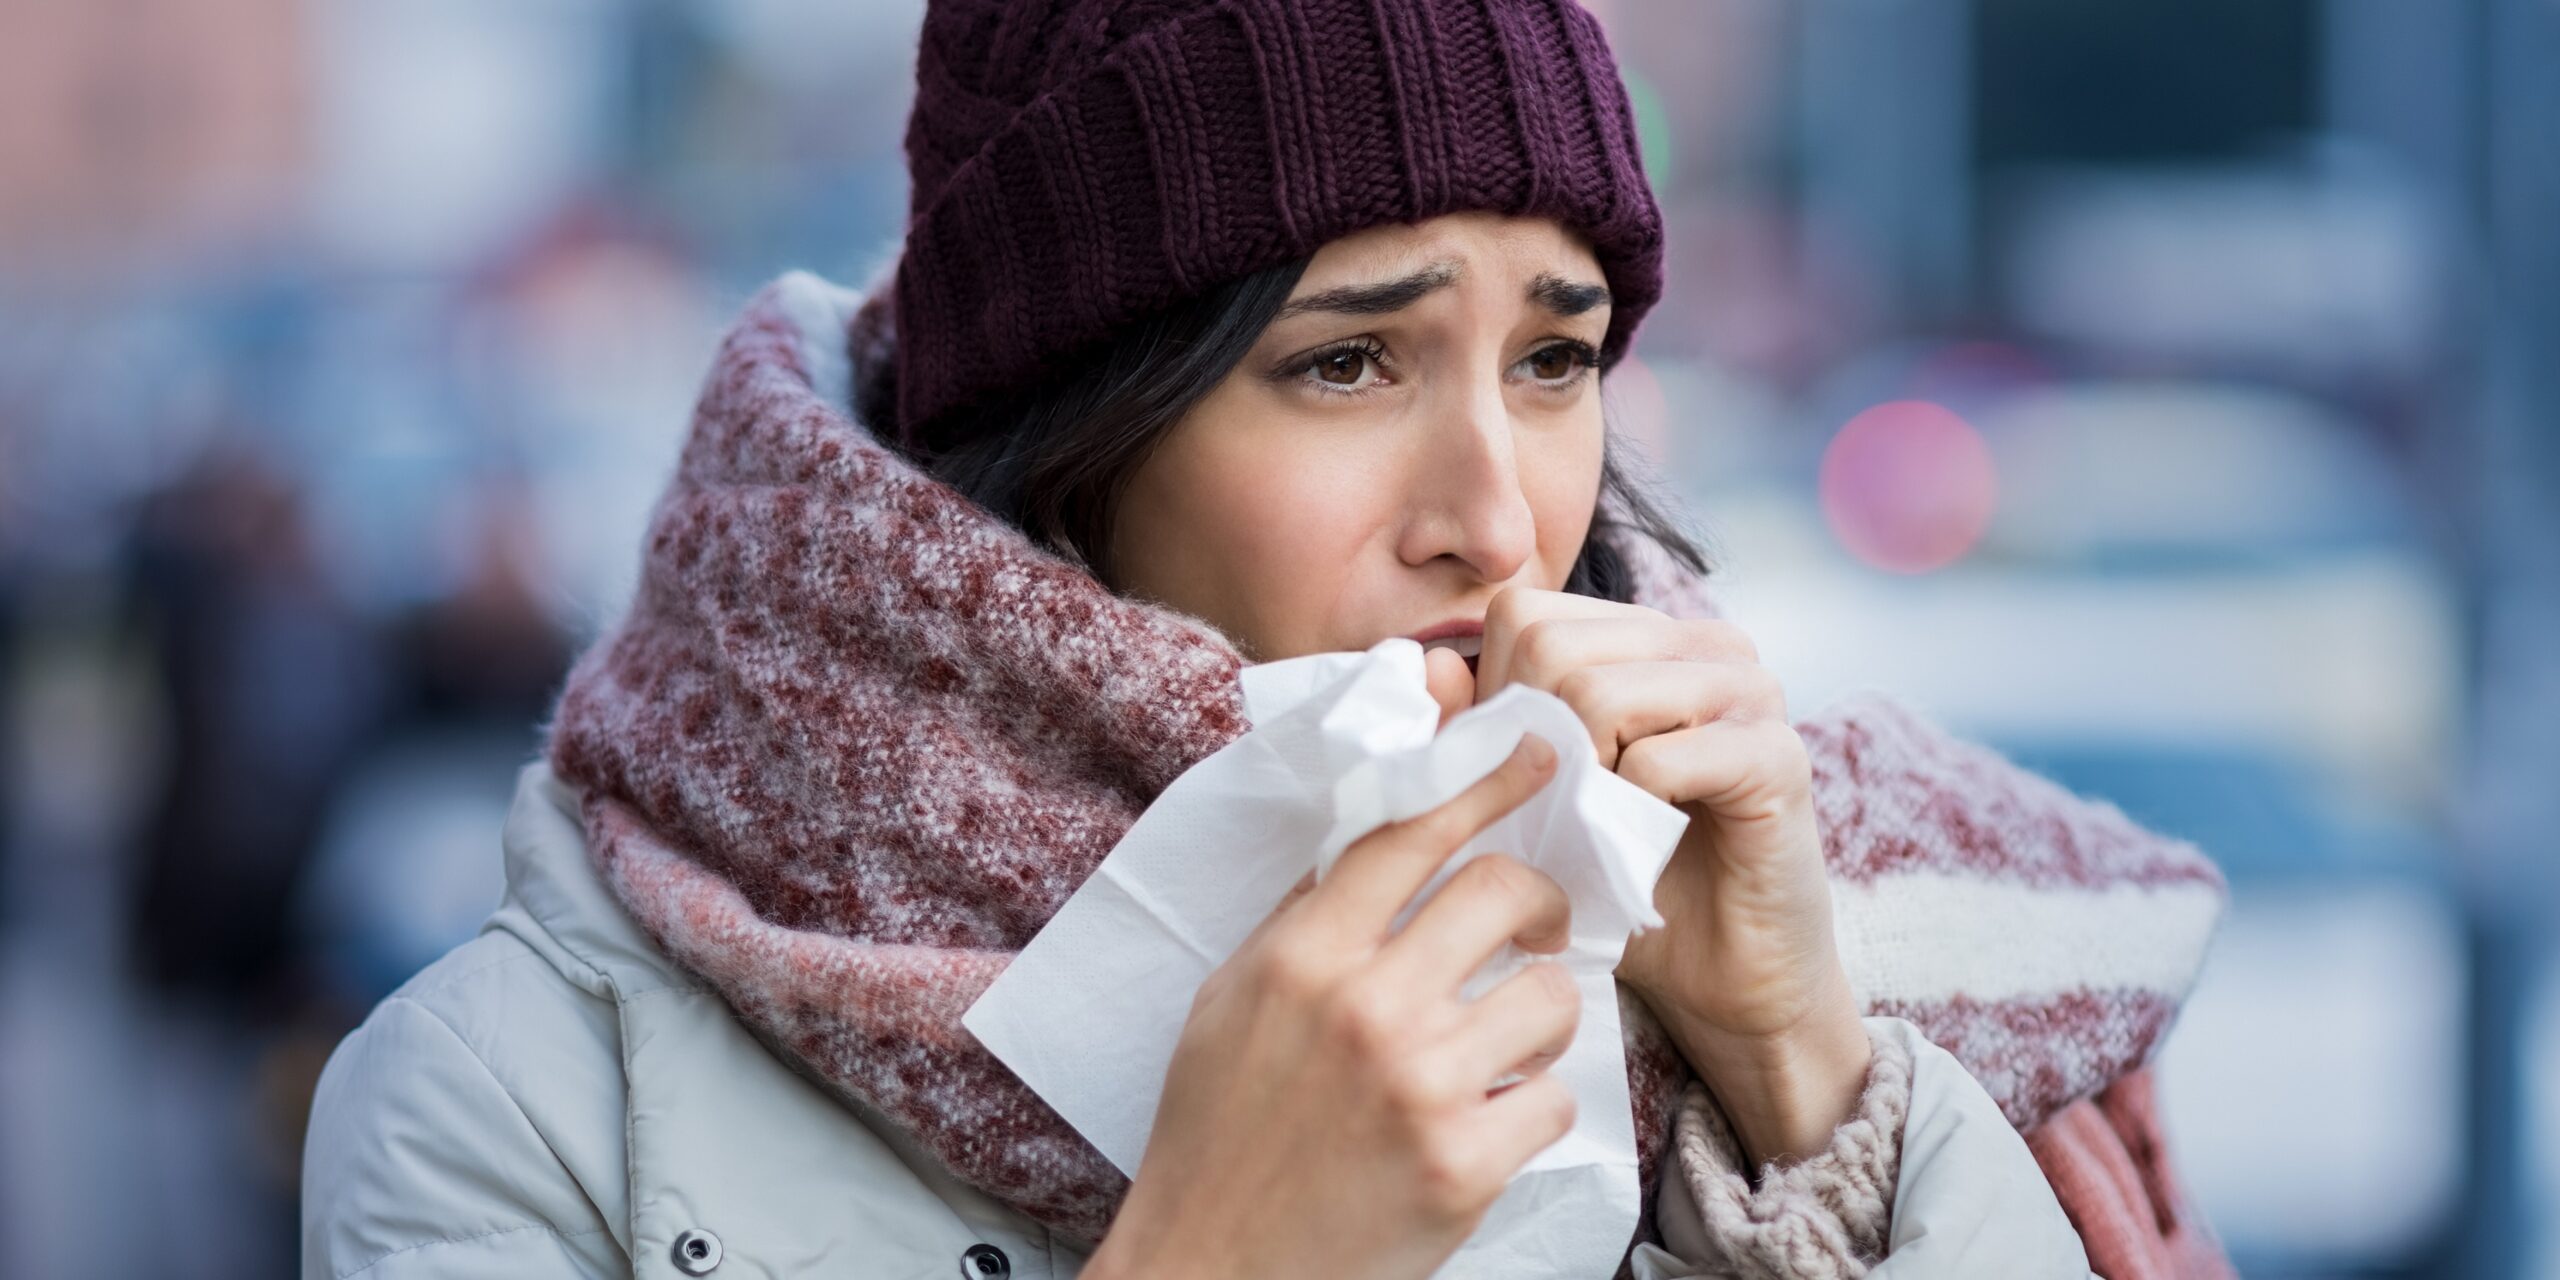 Prevent and treat colds naturally